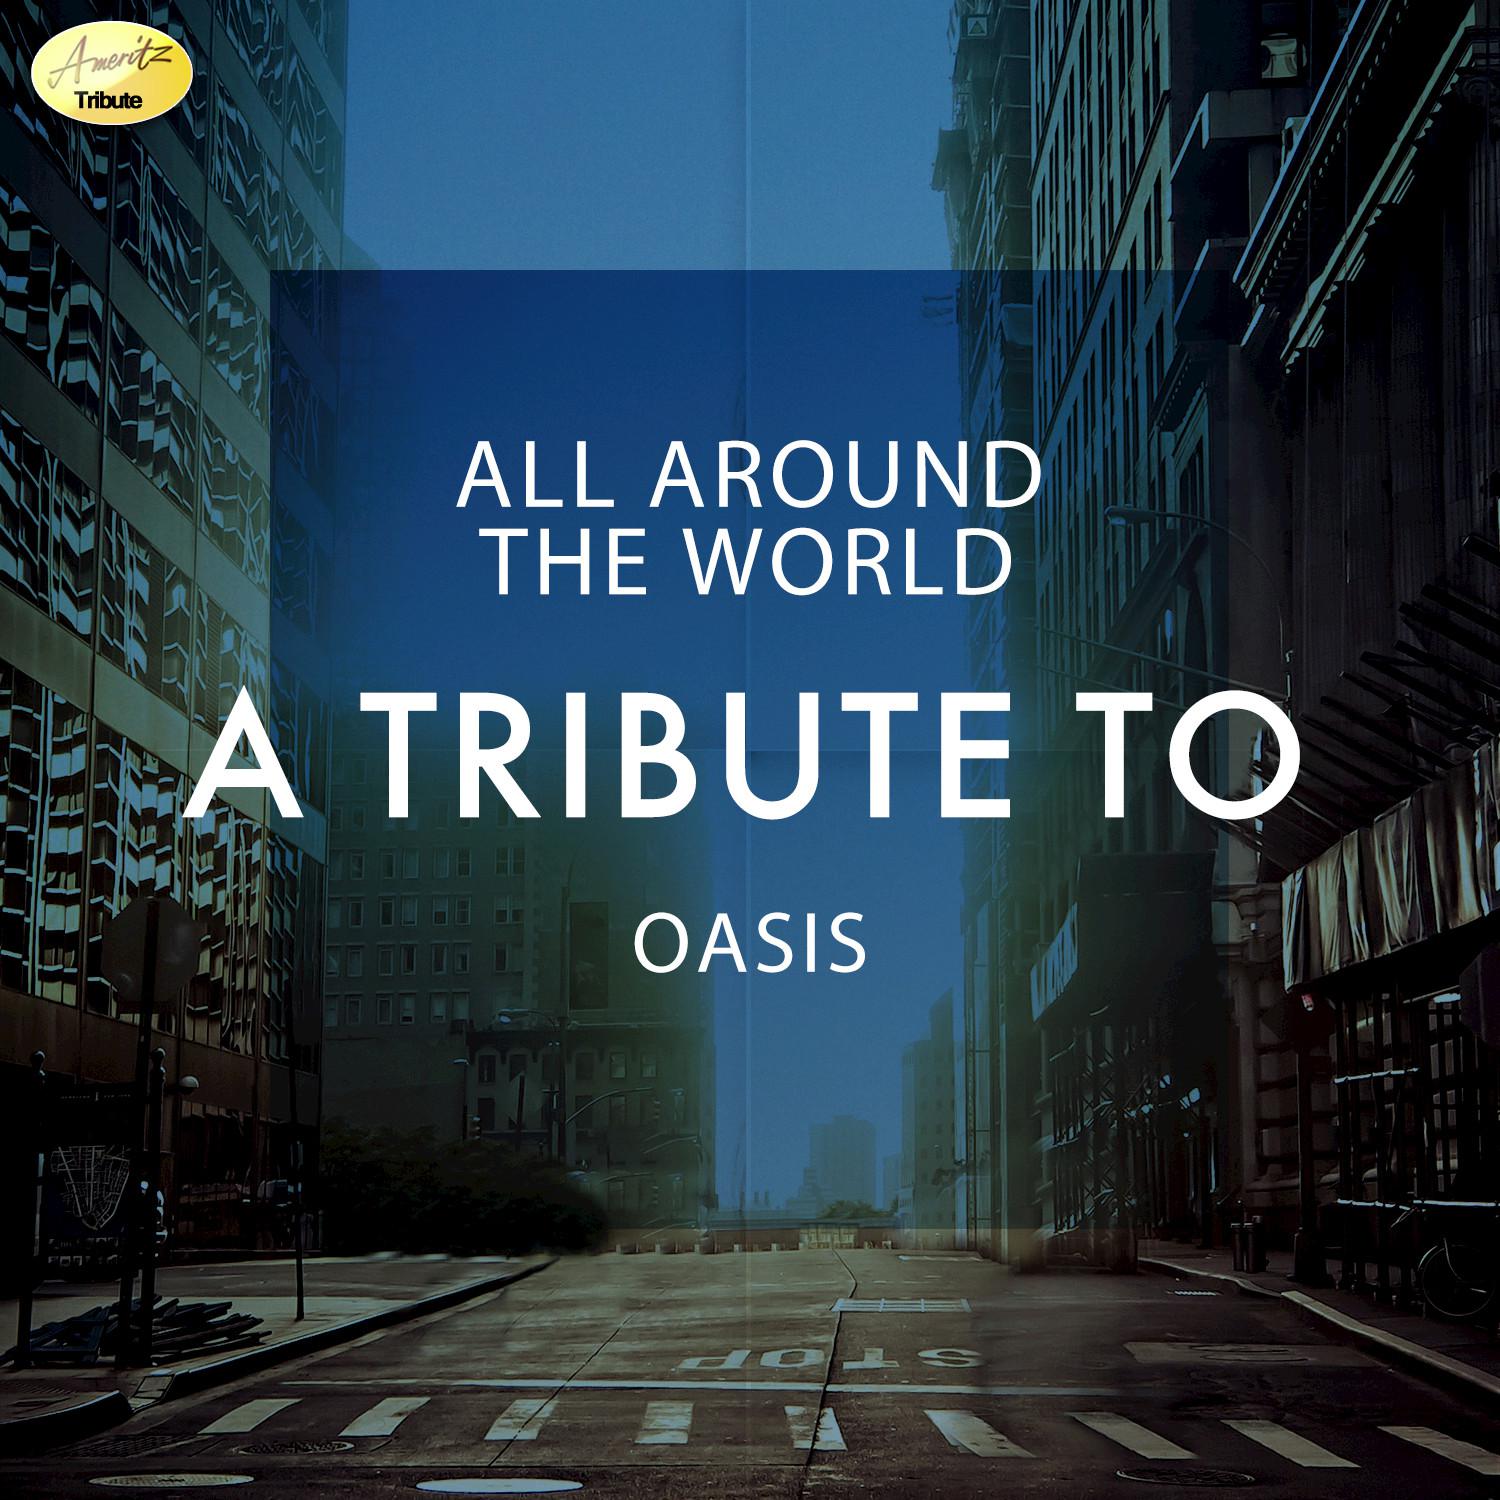 All Around the World - A Tribute to Oasis